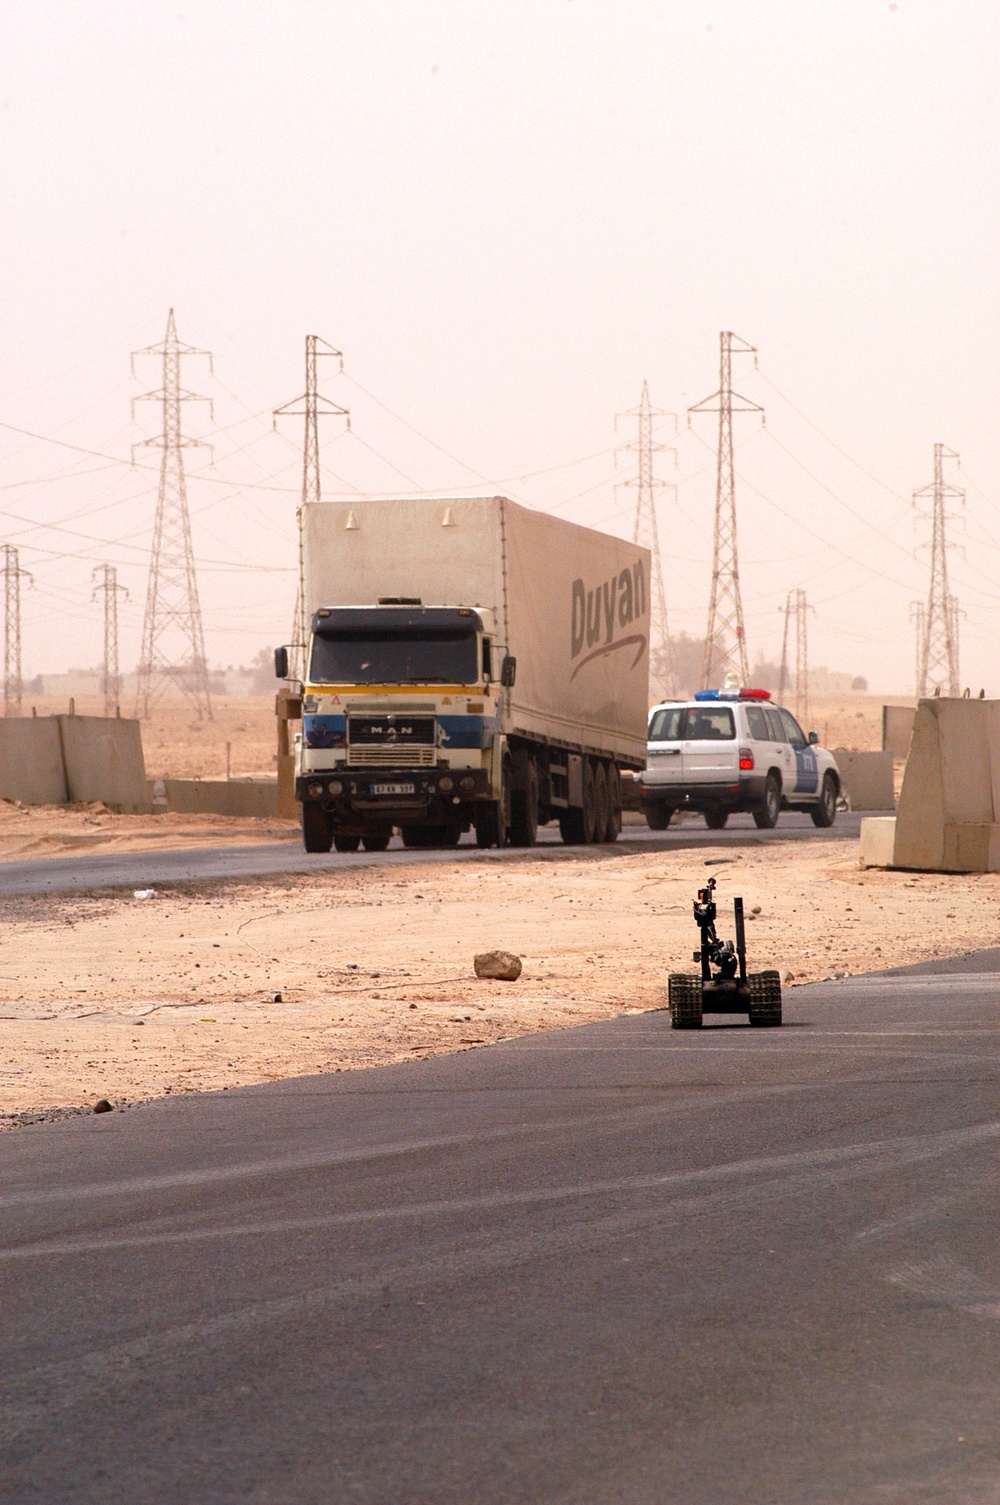 EOD uses a Talon EOD robot to check a vehicle for explosives